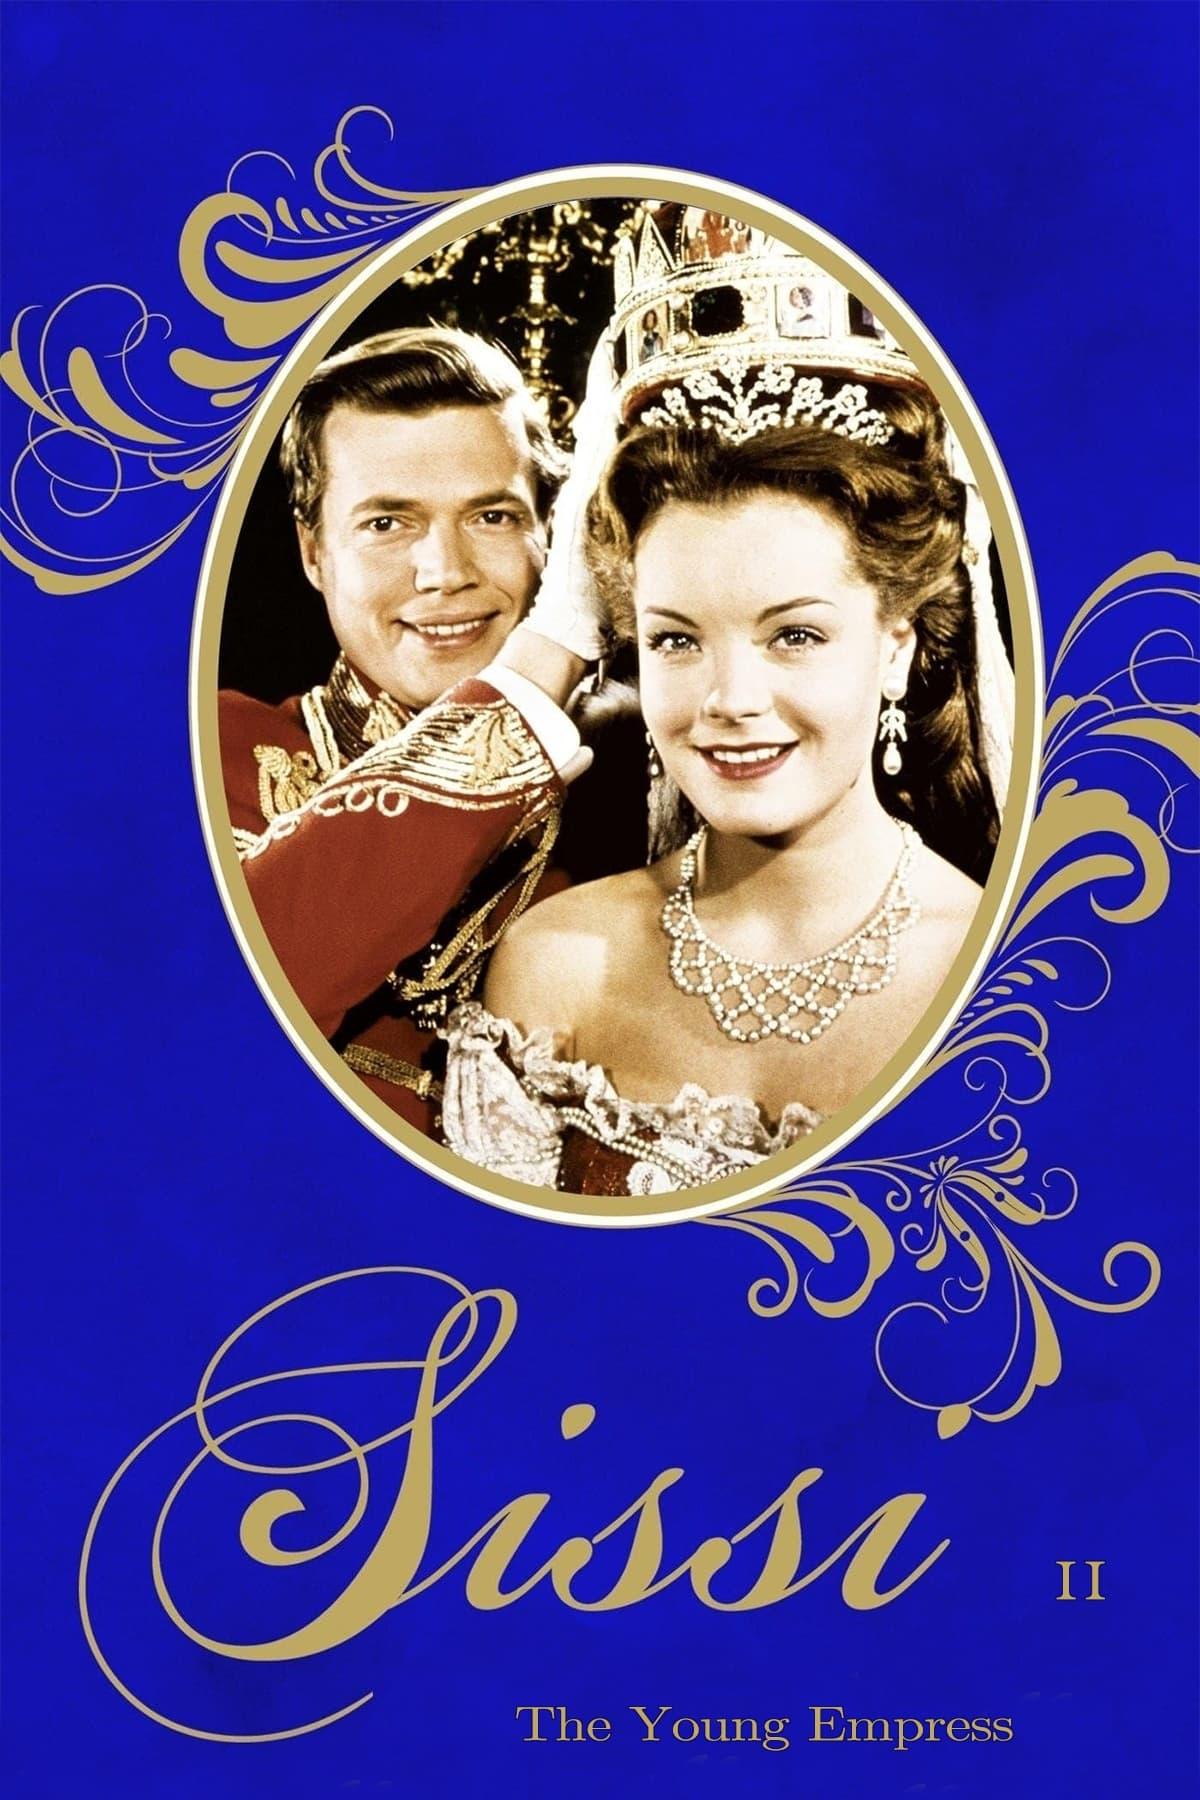 Sissi: The Young Empress poster